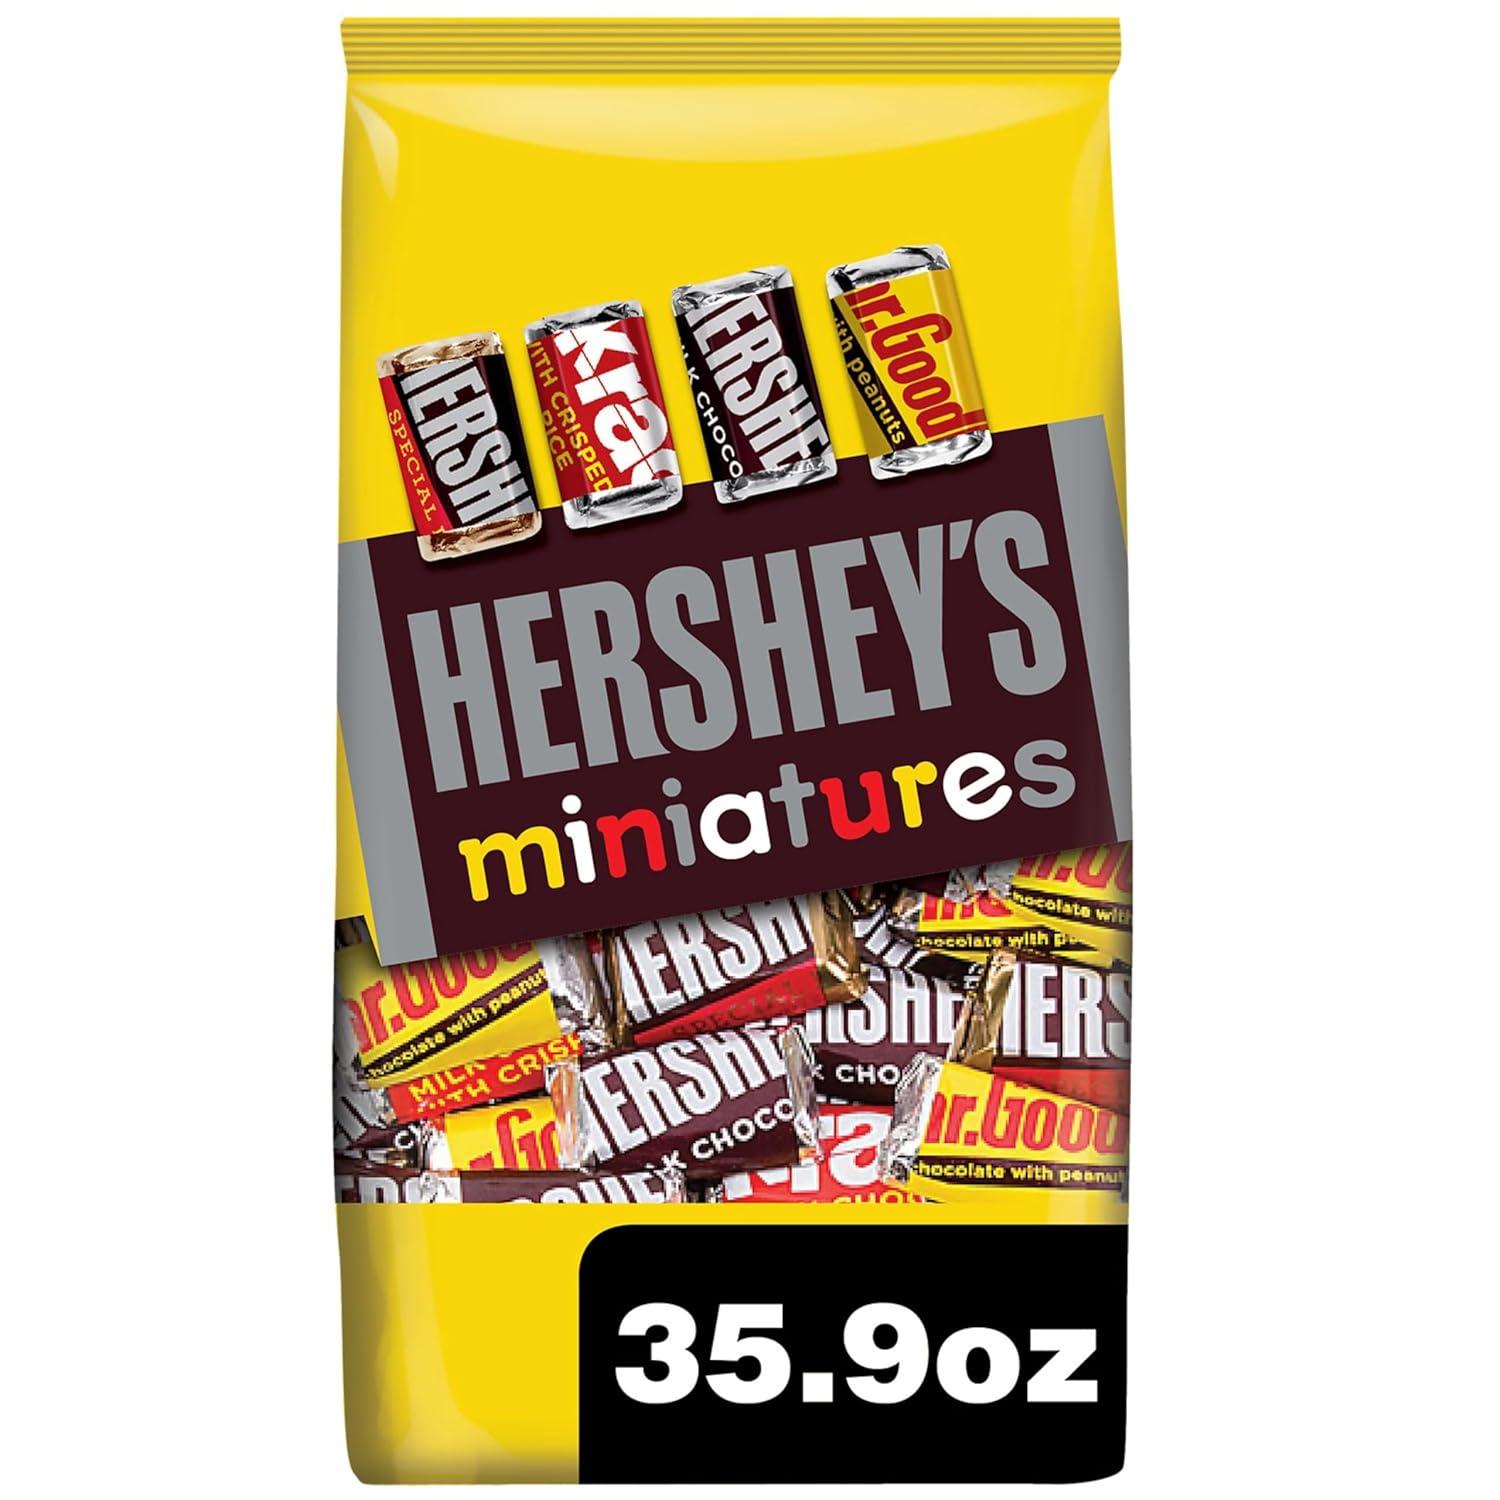 Hersheys Miniatures Assorted Chocolate Easter Candy Party Pack for $9.05